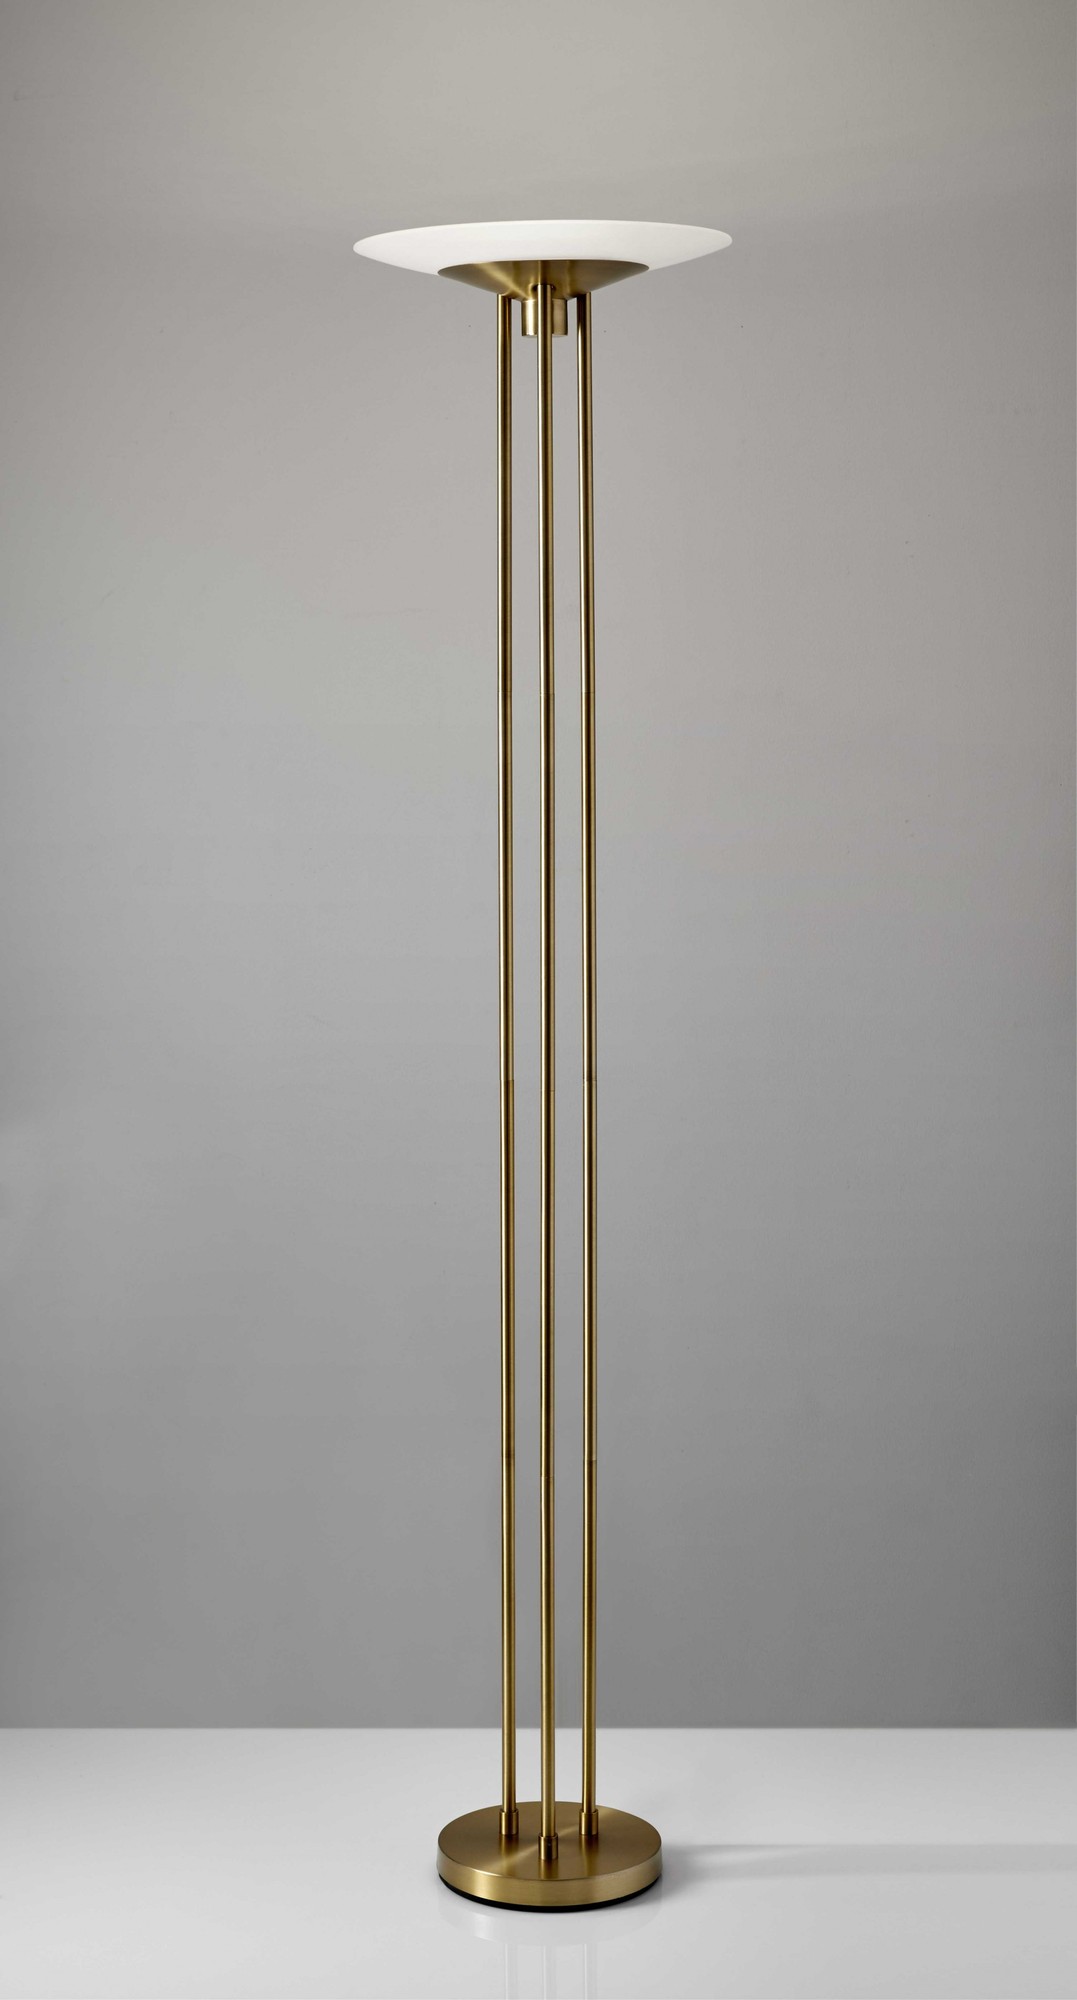 16" X 16" X 71" Brass Metal LED Torchiere